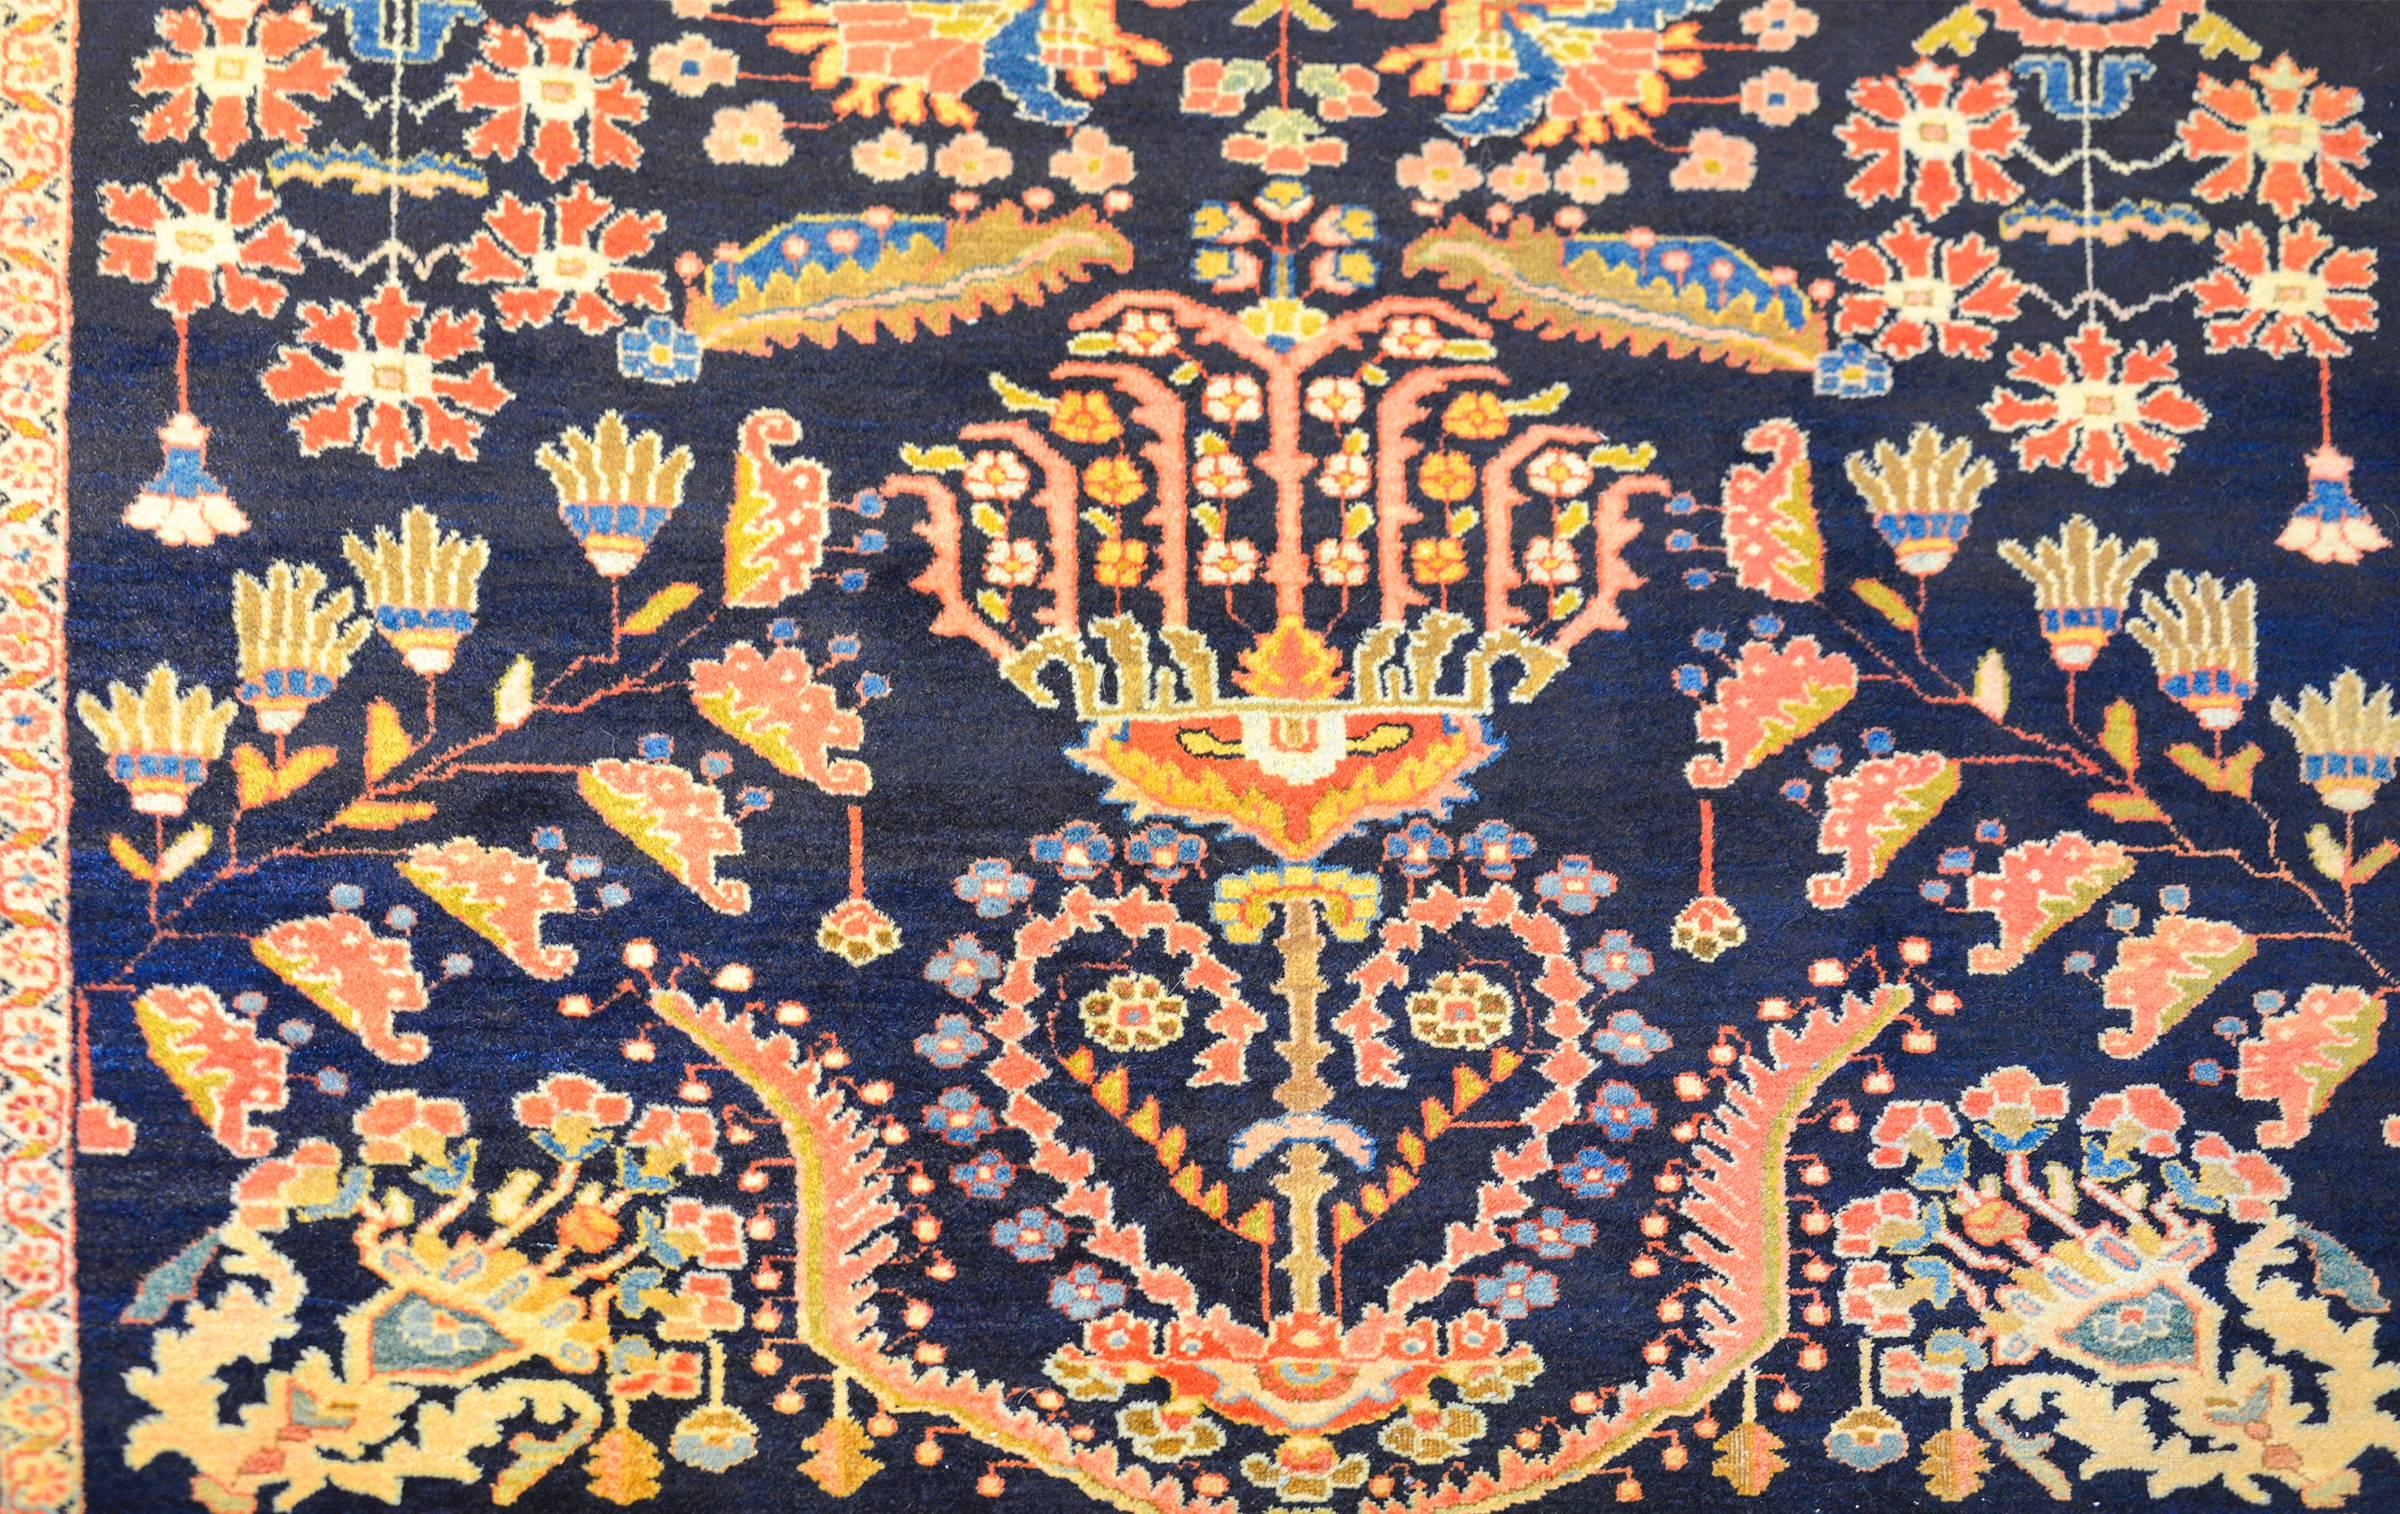 A fantastic 19th century Persian Mohajeran rug with a traditional mirrored tree-of-life and floral pattern woven in multicolored vegetable dyed wool on a dark indigo background. The border is contrasting with a floral and vine pattern woven in a